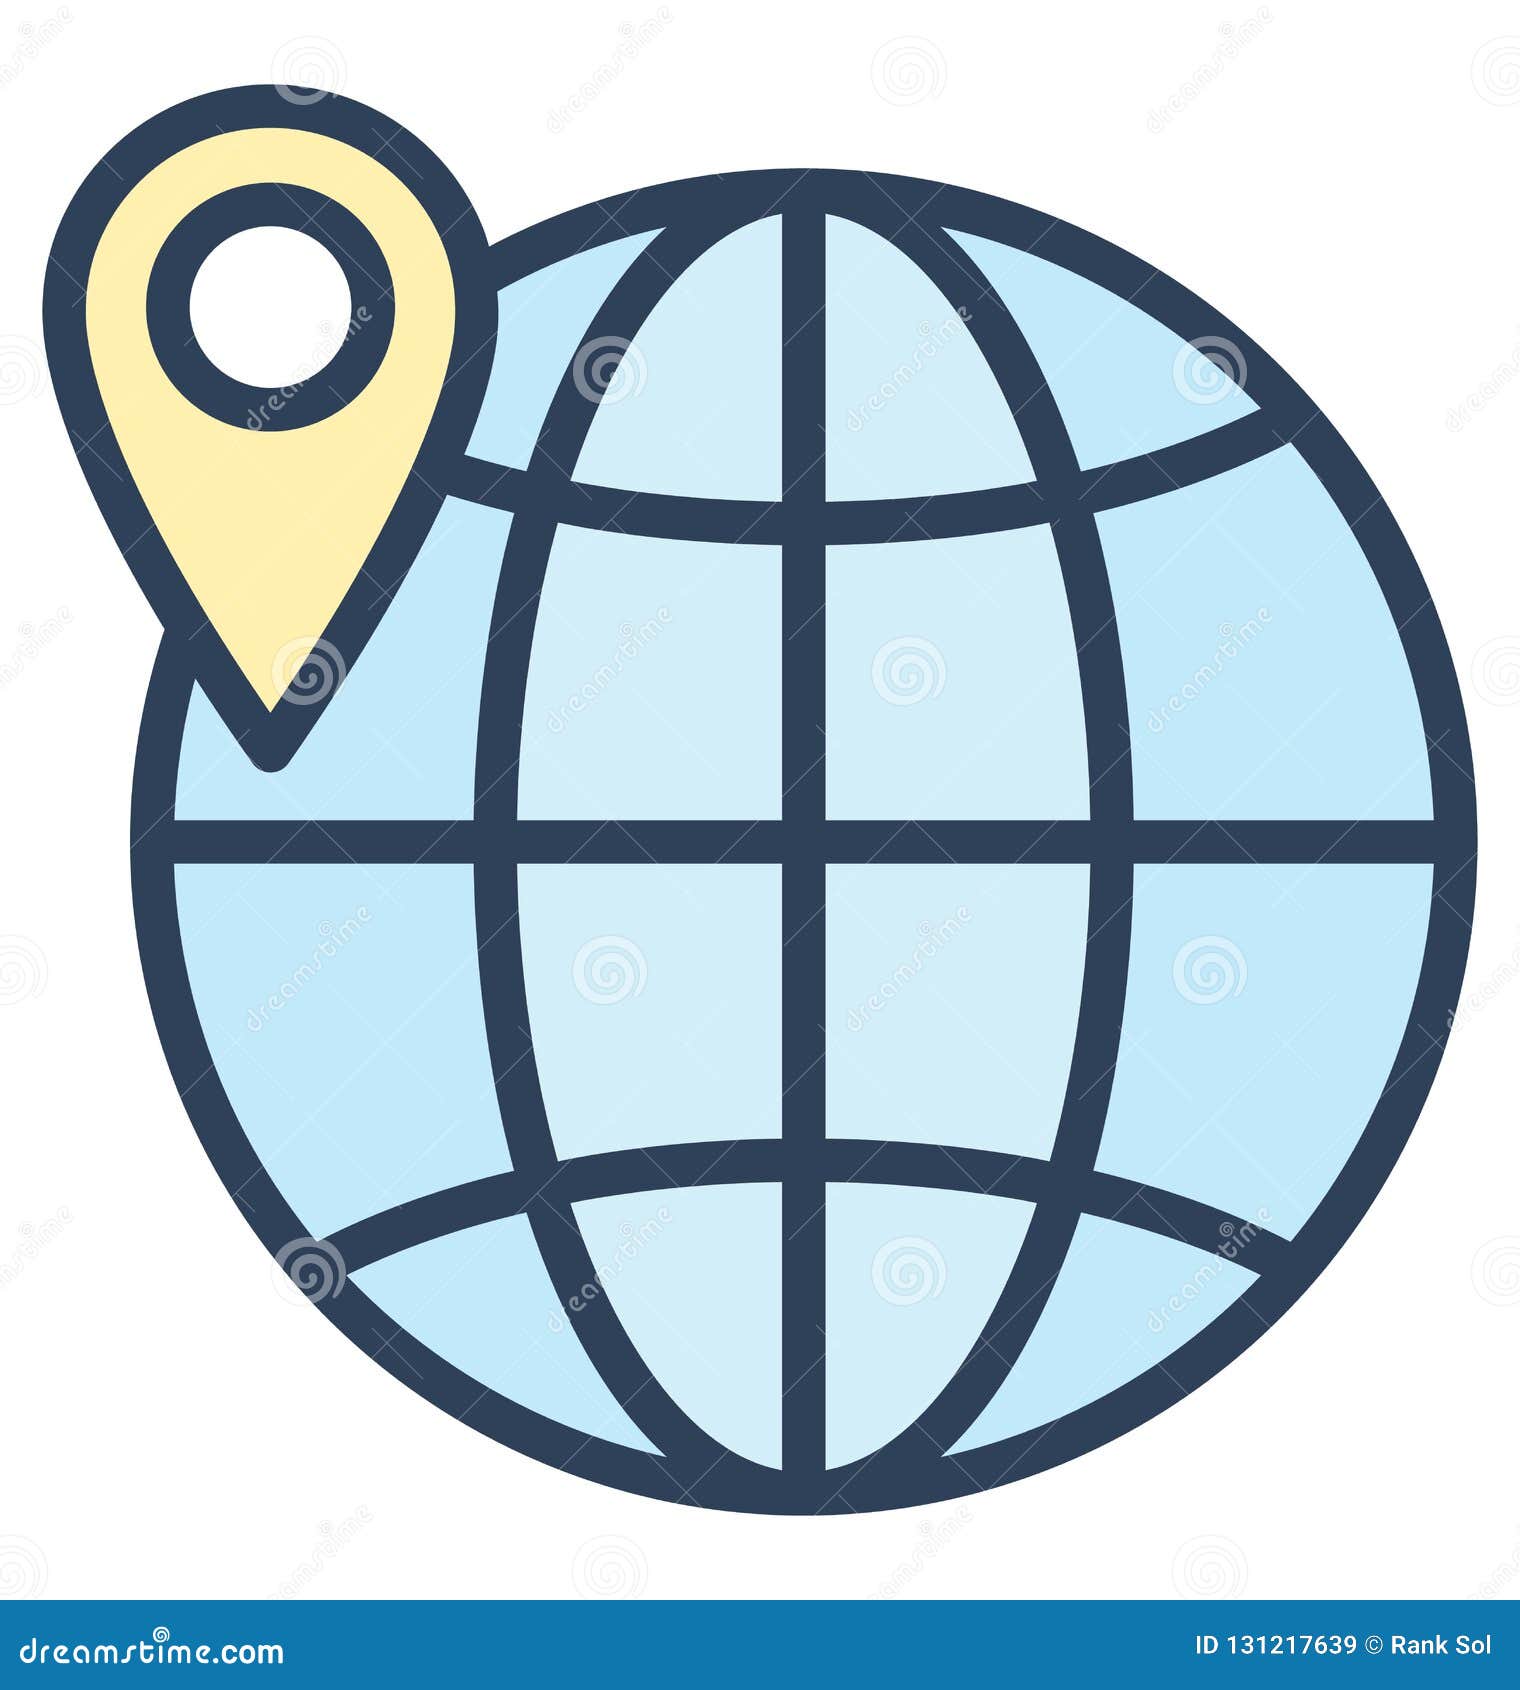 pin on globe, globale   icon that can be very easily edit or modified.